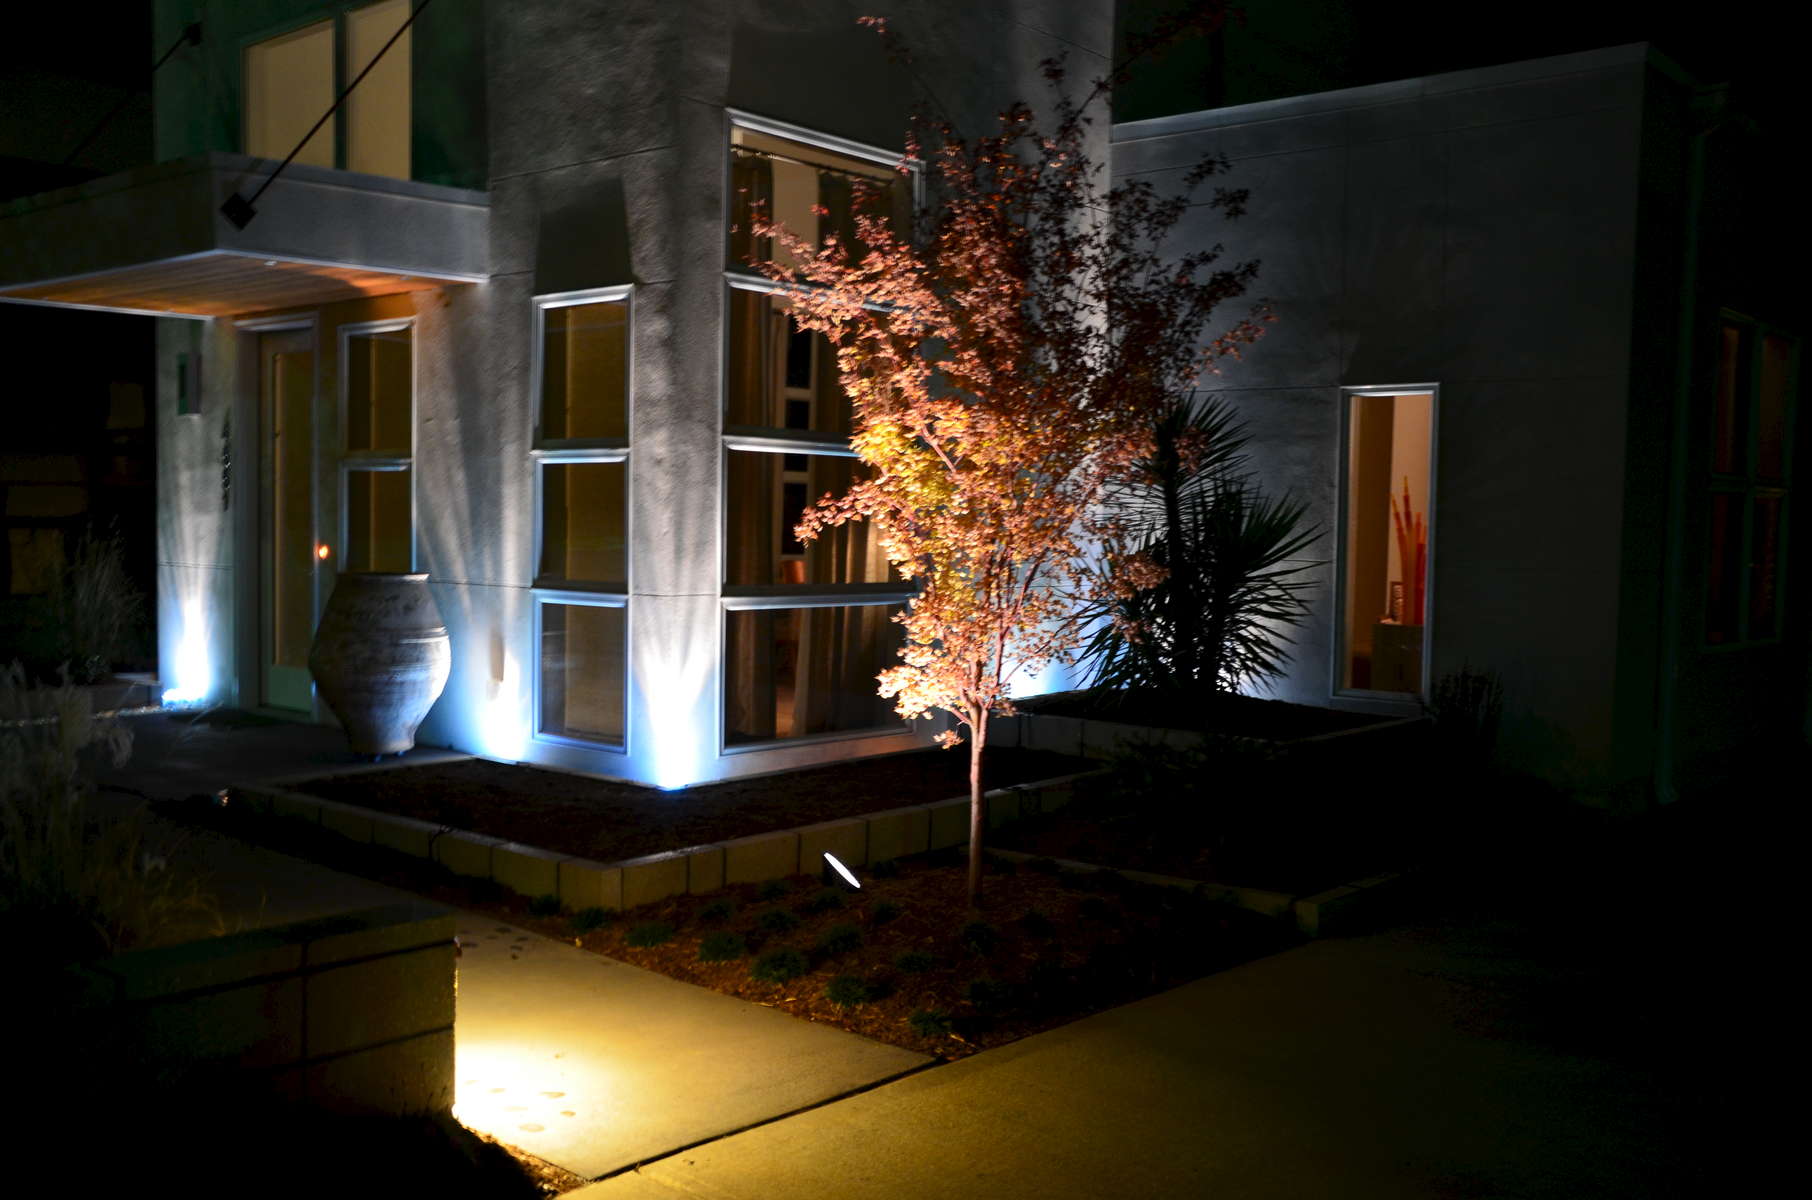 This evening image taken of this contemporary home and landscape in Cotswold shows the magical union of professional landscape design and lighting. Lighting brings the colors, textures and dimension to life after dark for all-hour enjoyment!